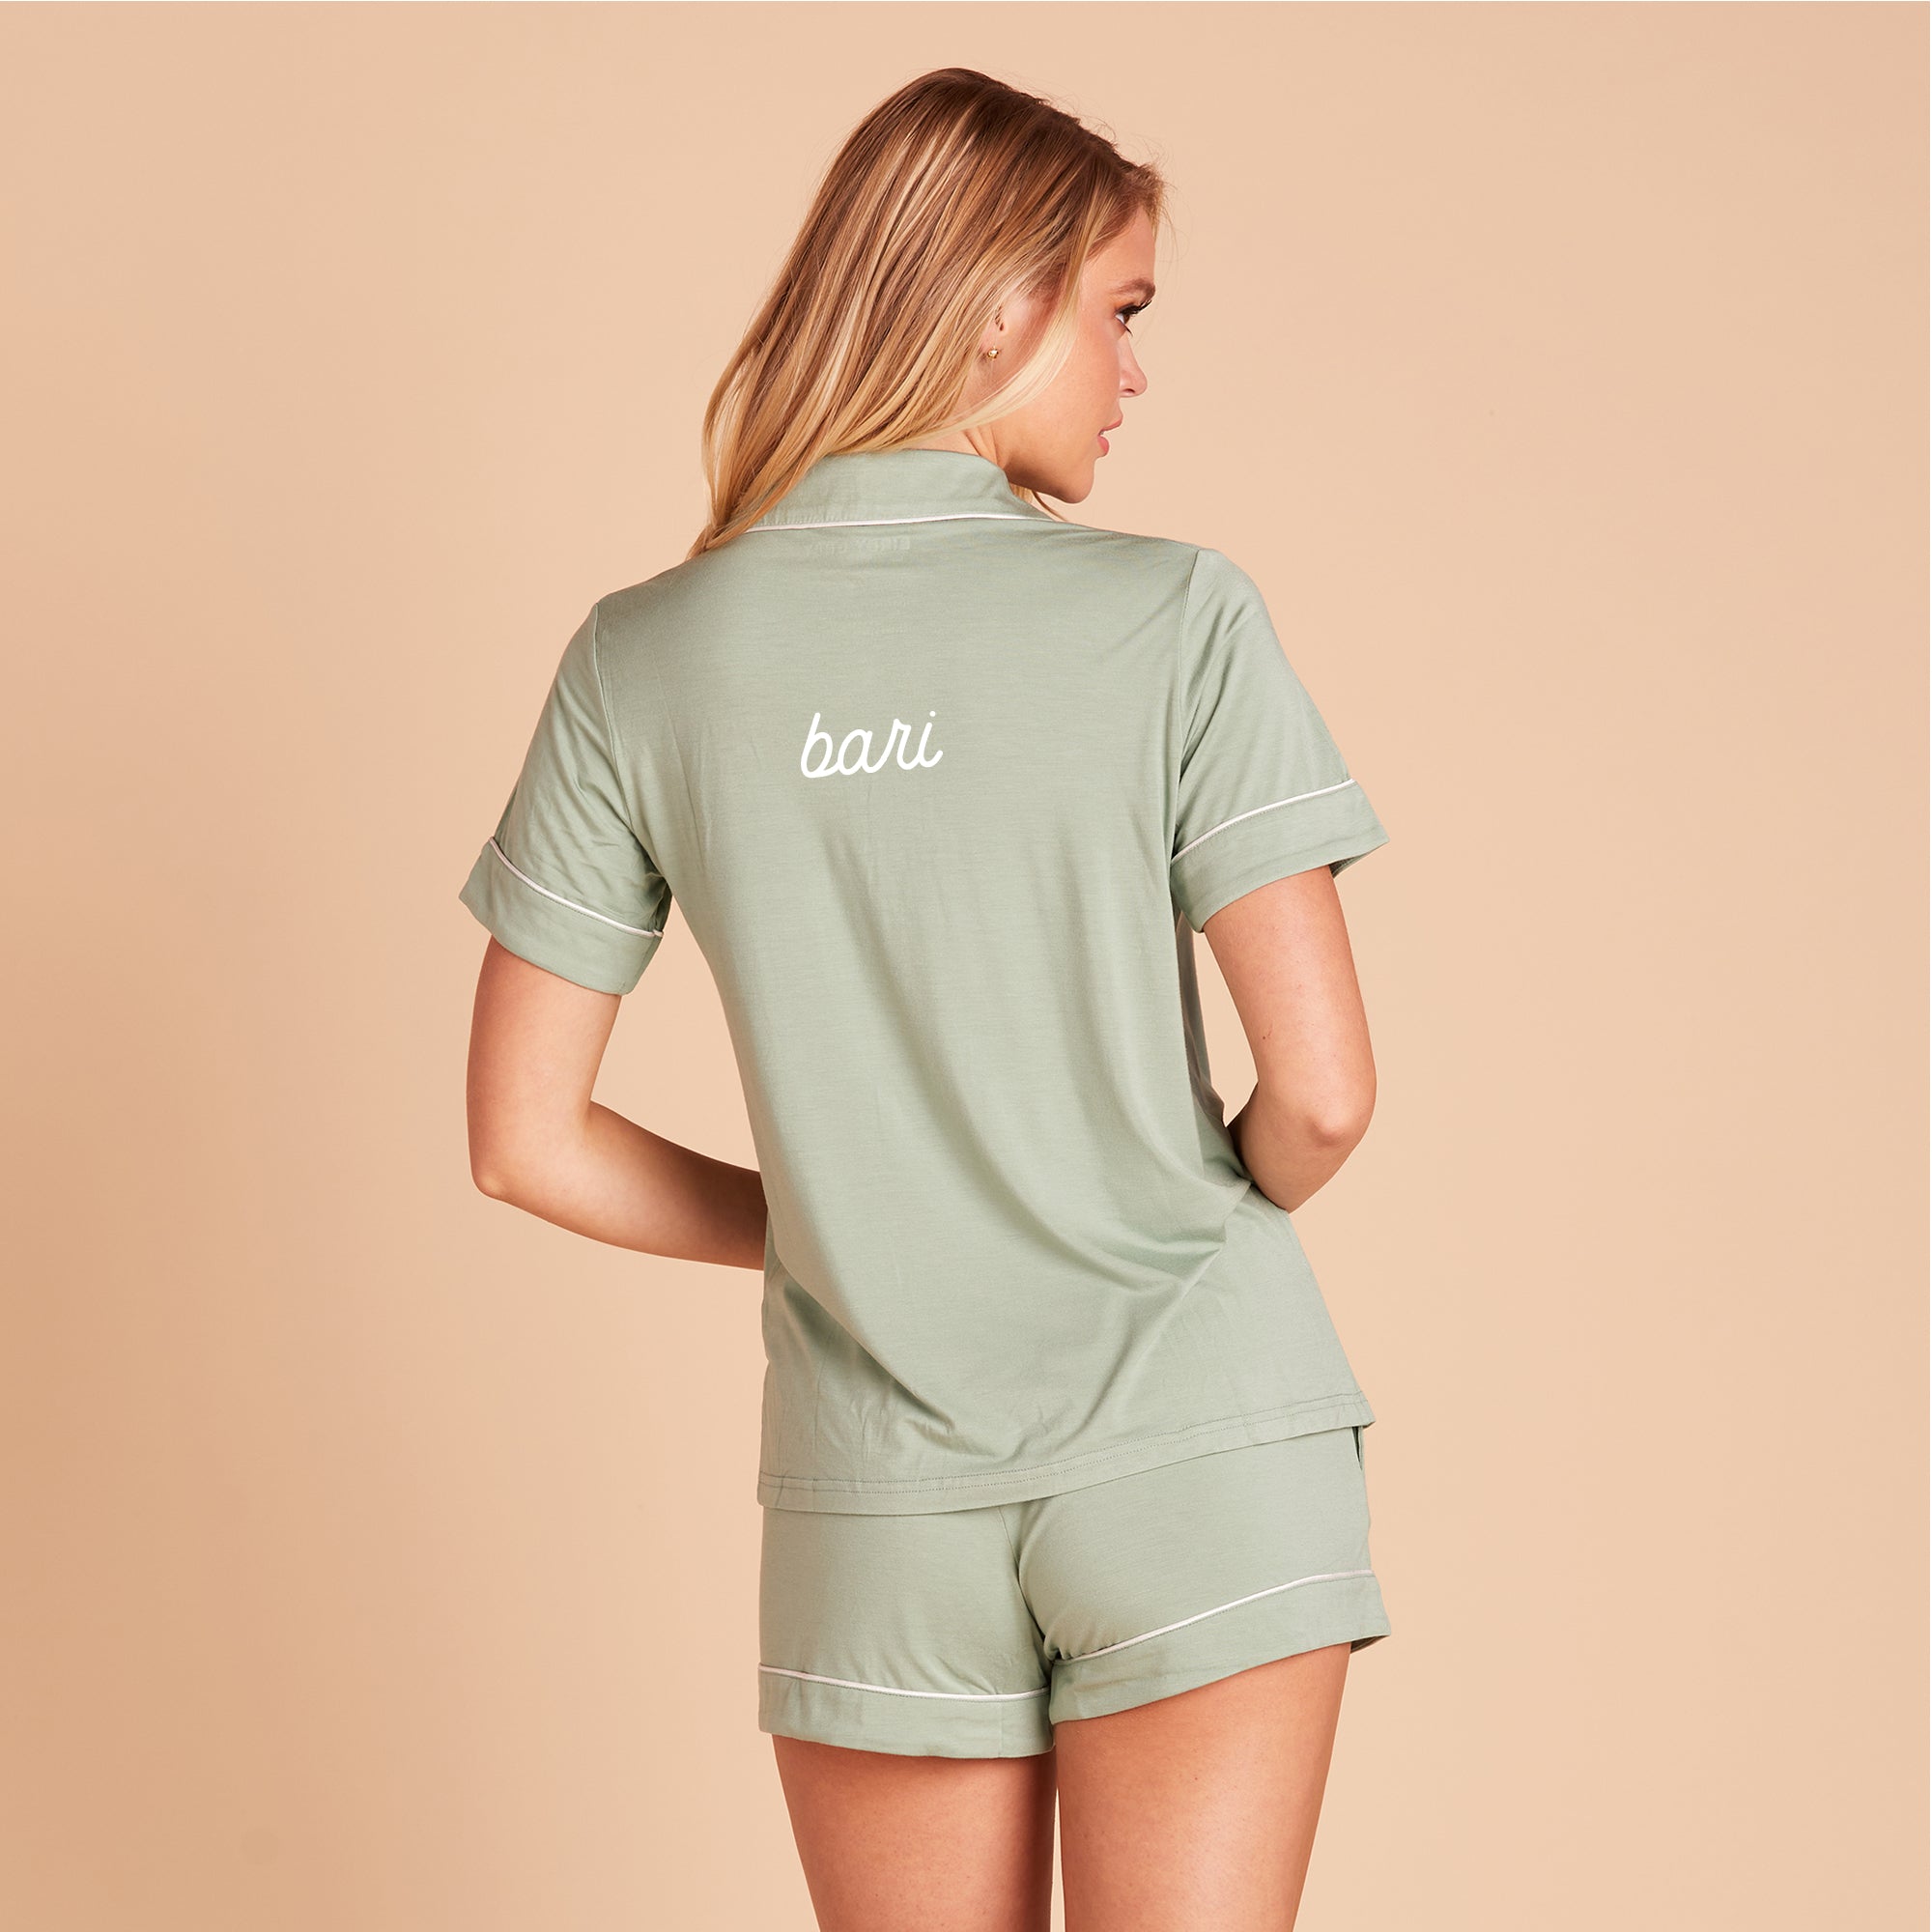 Back view of the Jonny Pajama Set in sage with embroidery personalization that reads “Bari” in cursive.